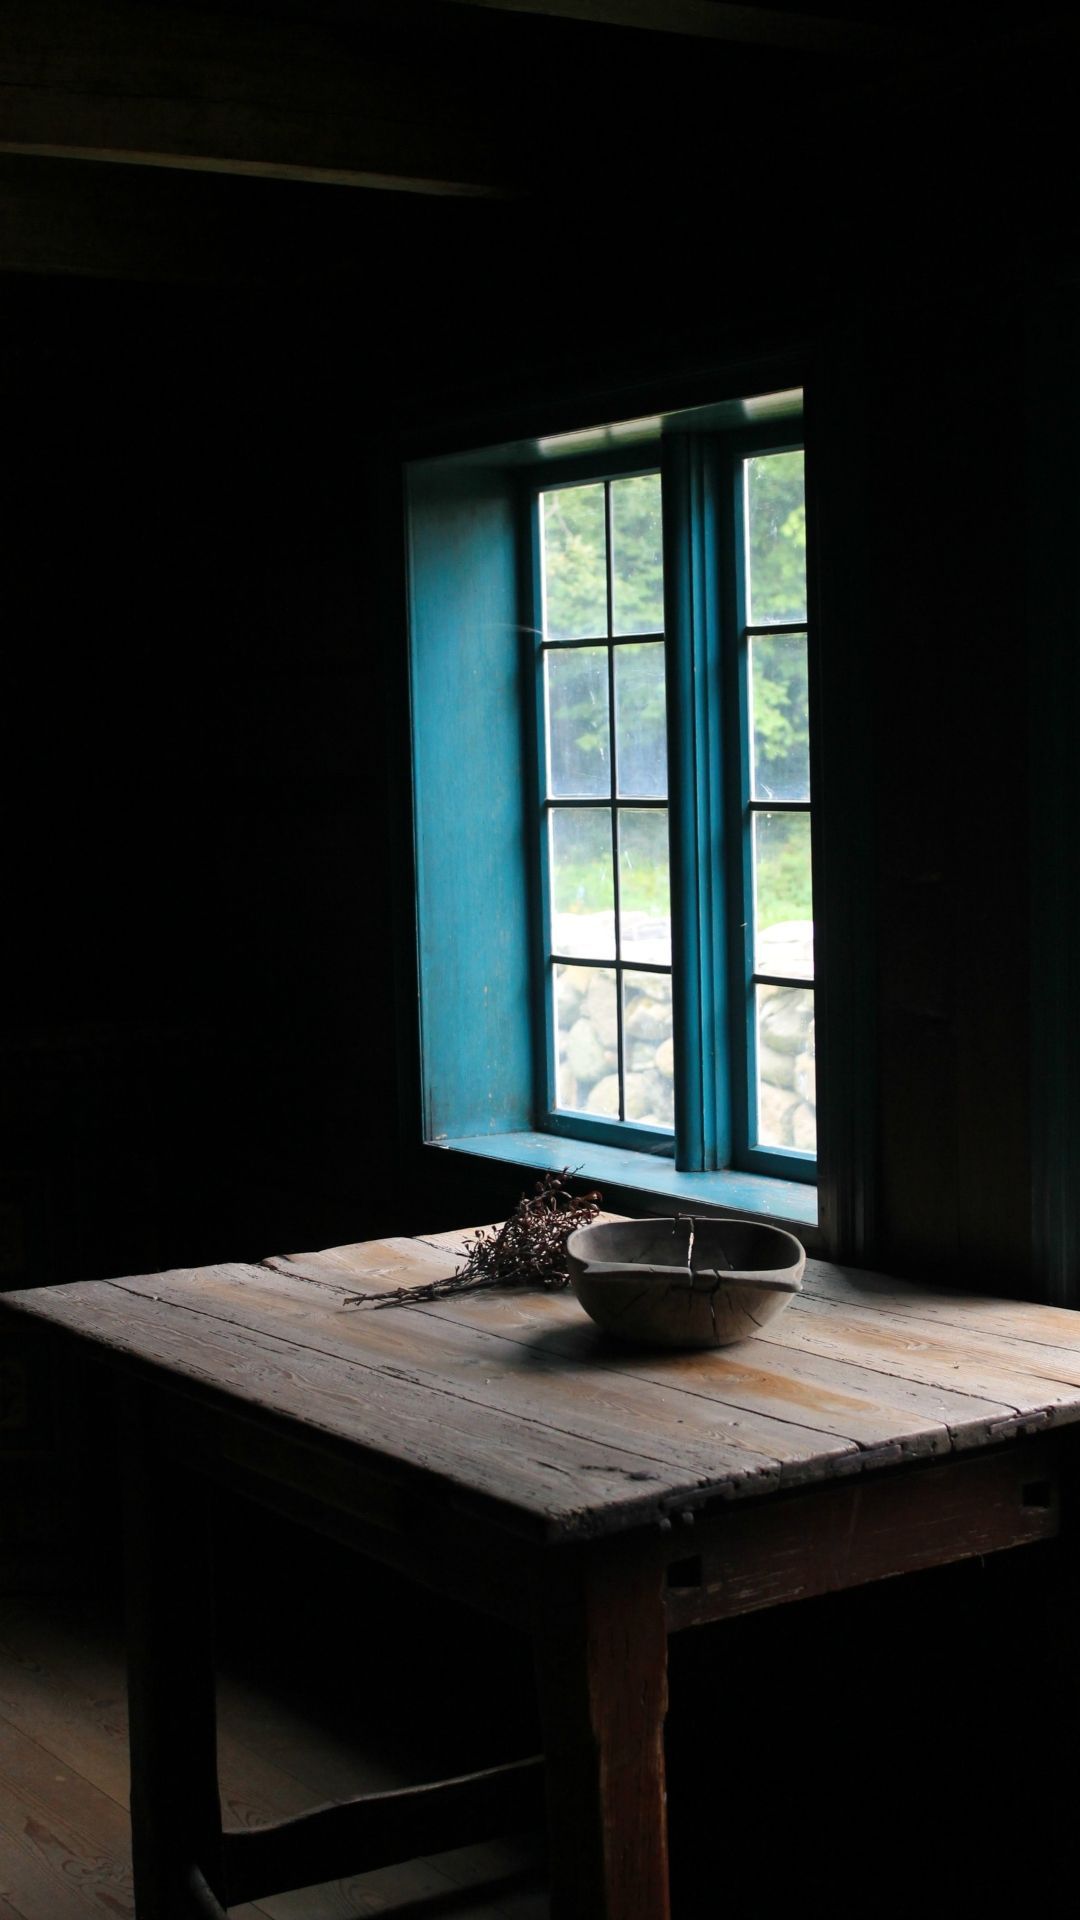 smartphone wallpaper: rustic table, bowl and blue windows